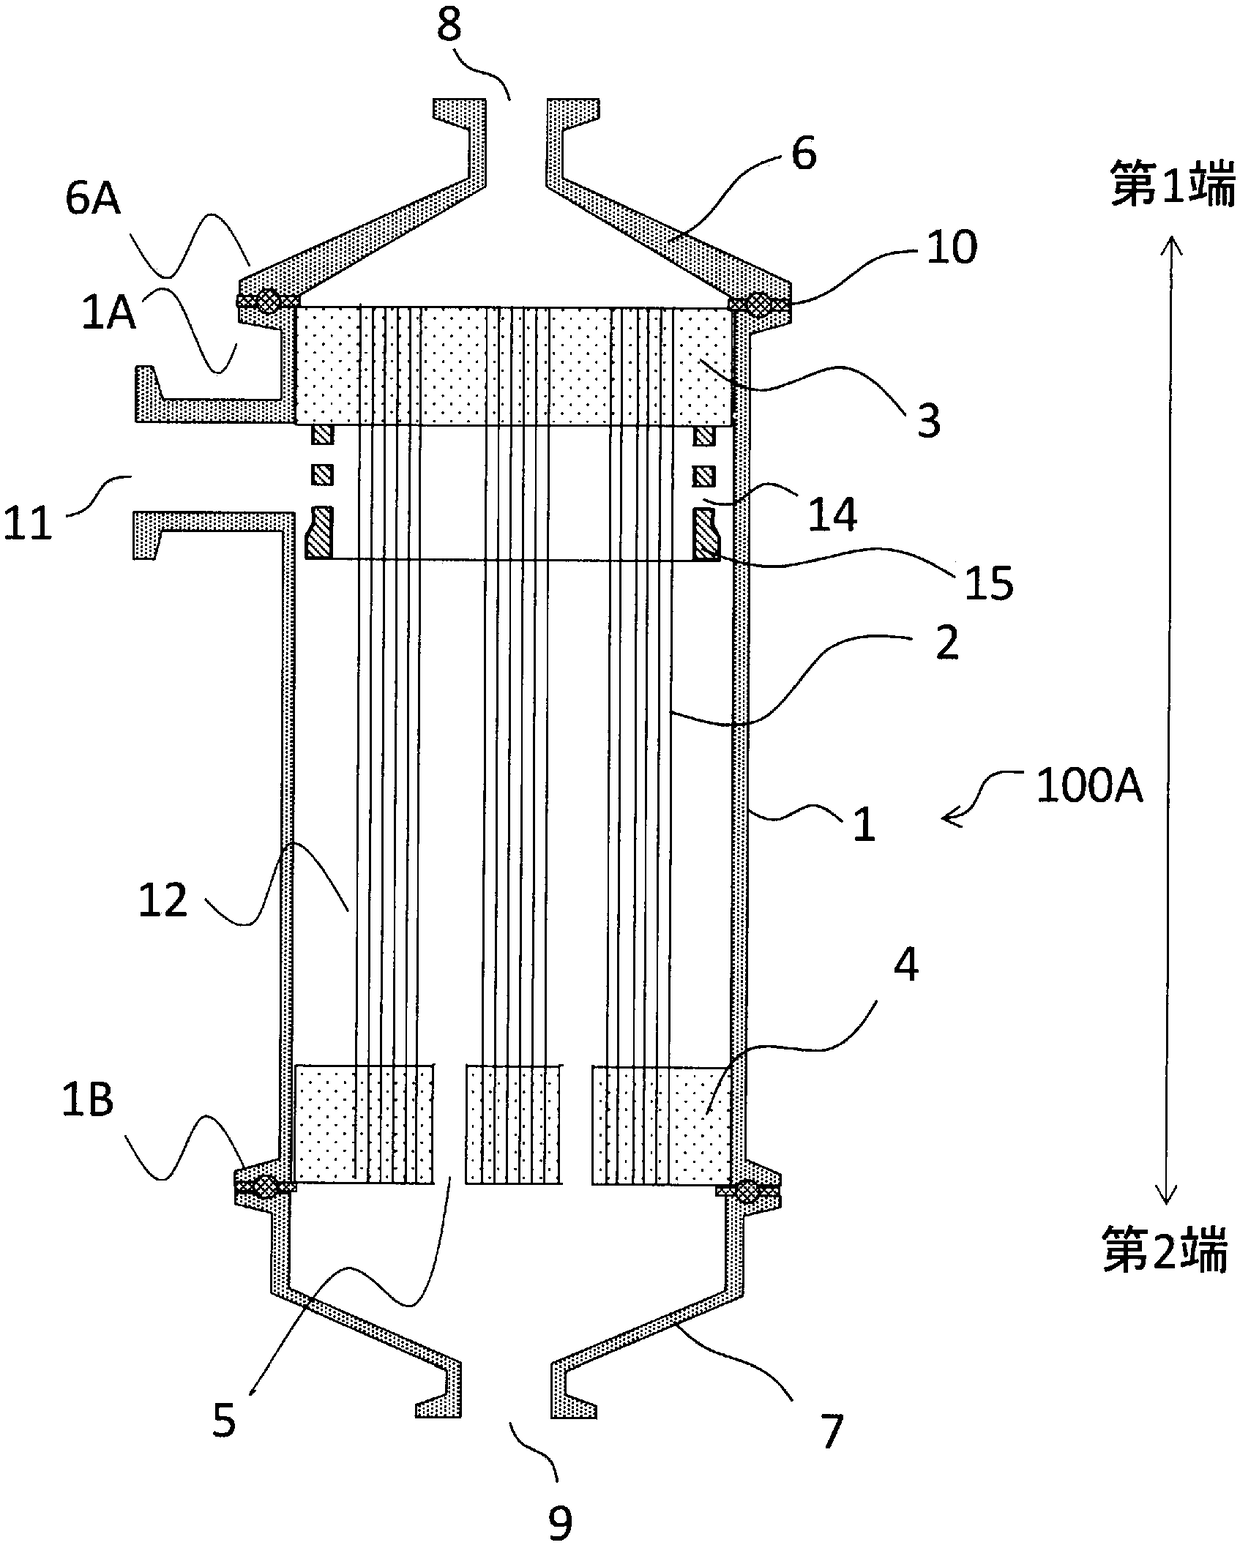 Hollow fiber membrane module and method for producing the hollow fiber membrane module